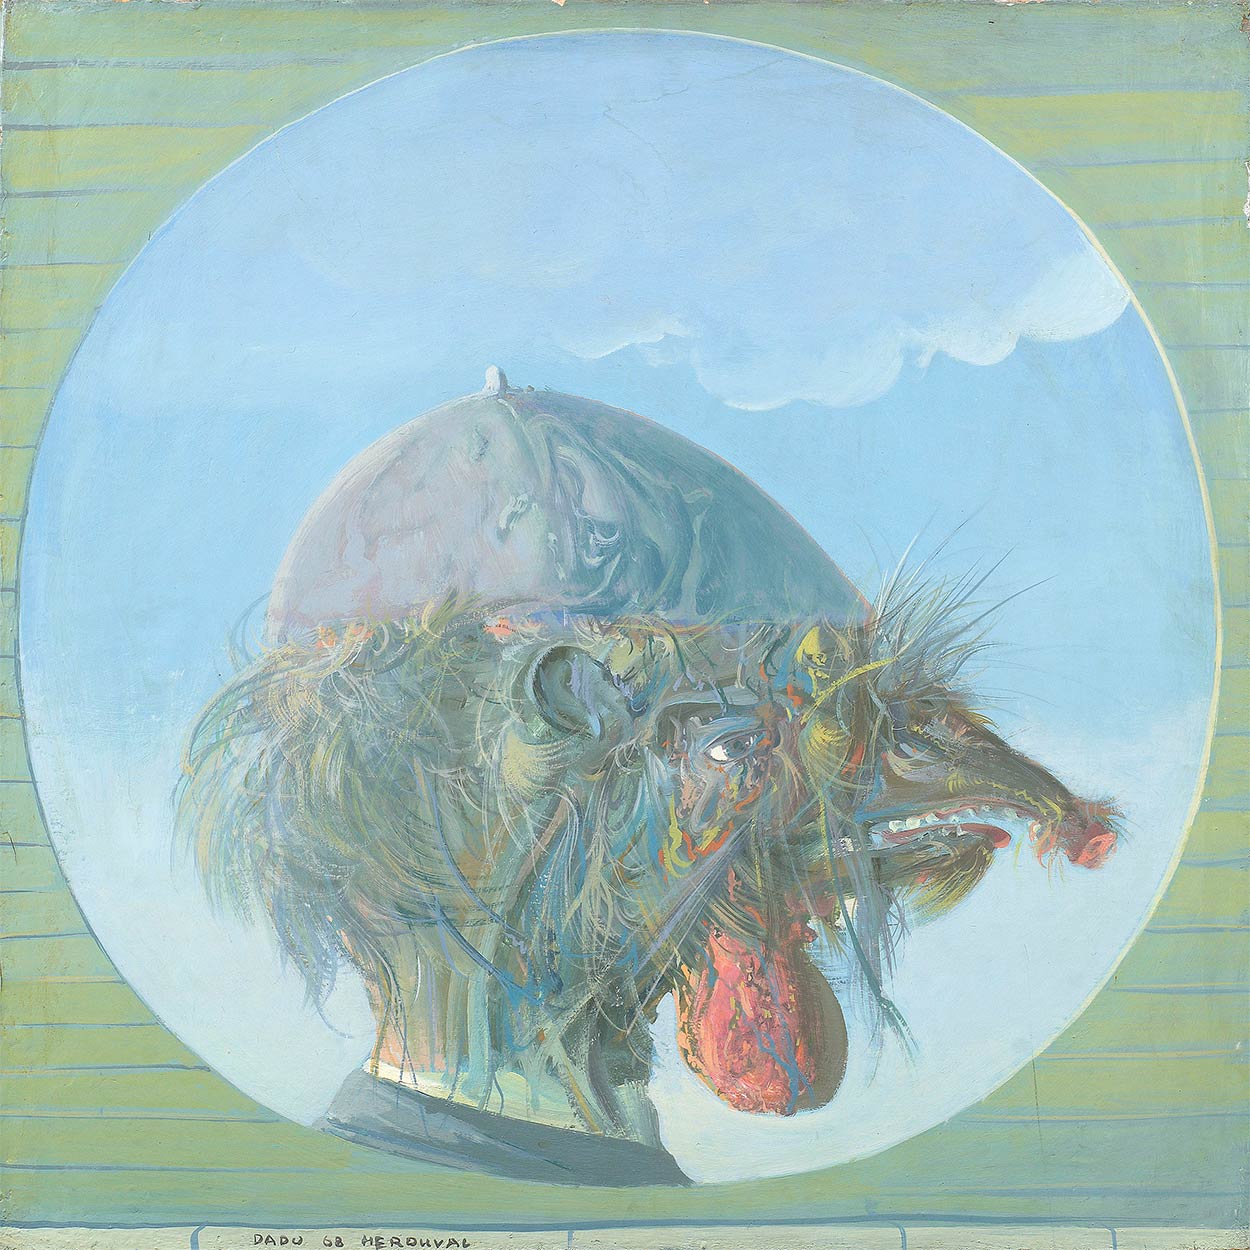 Dado’s painting: Untitled, 1968